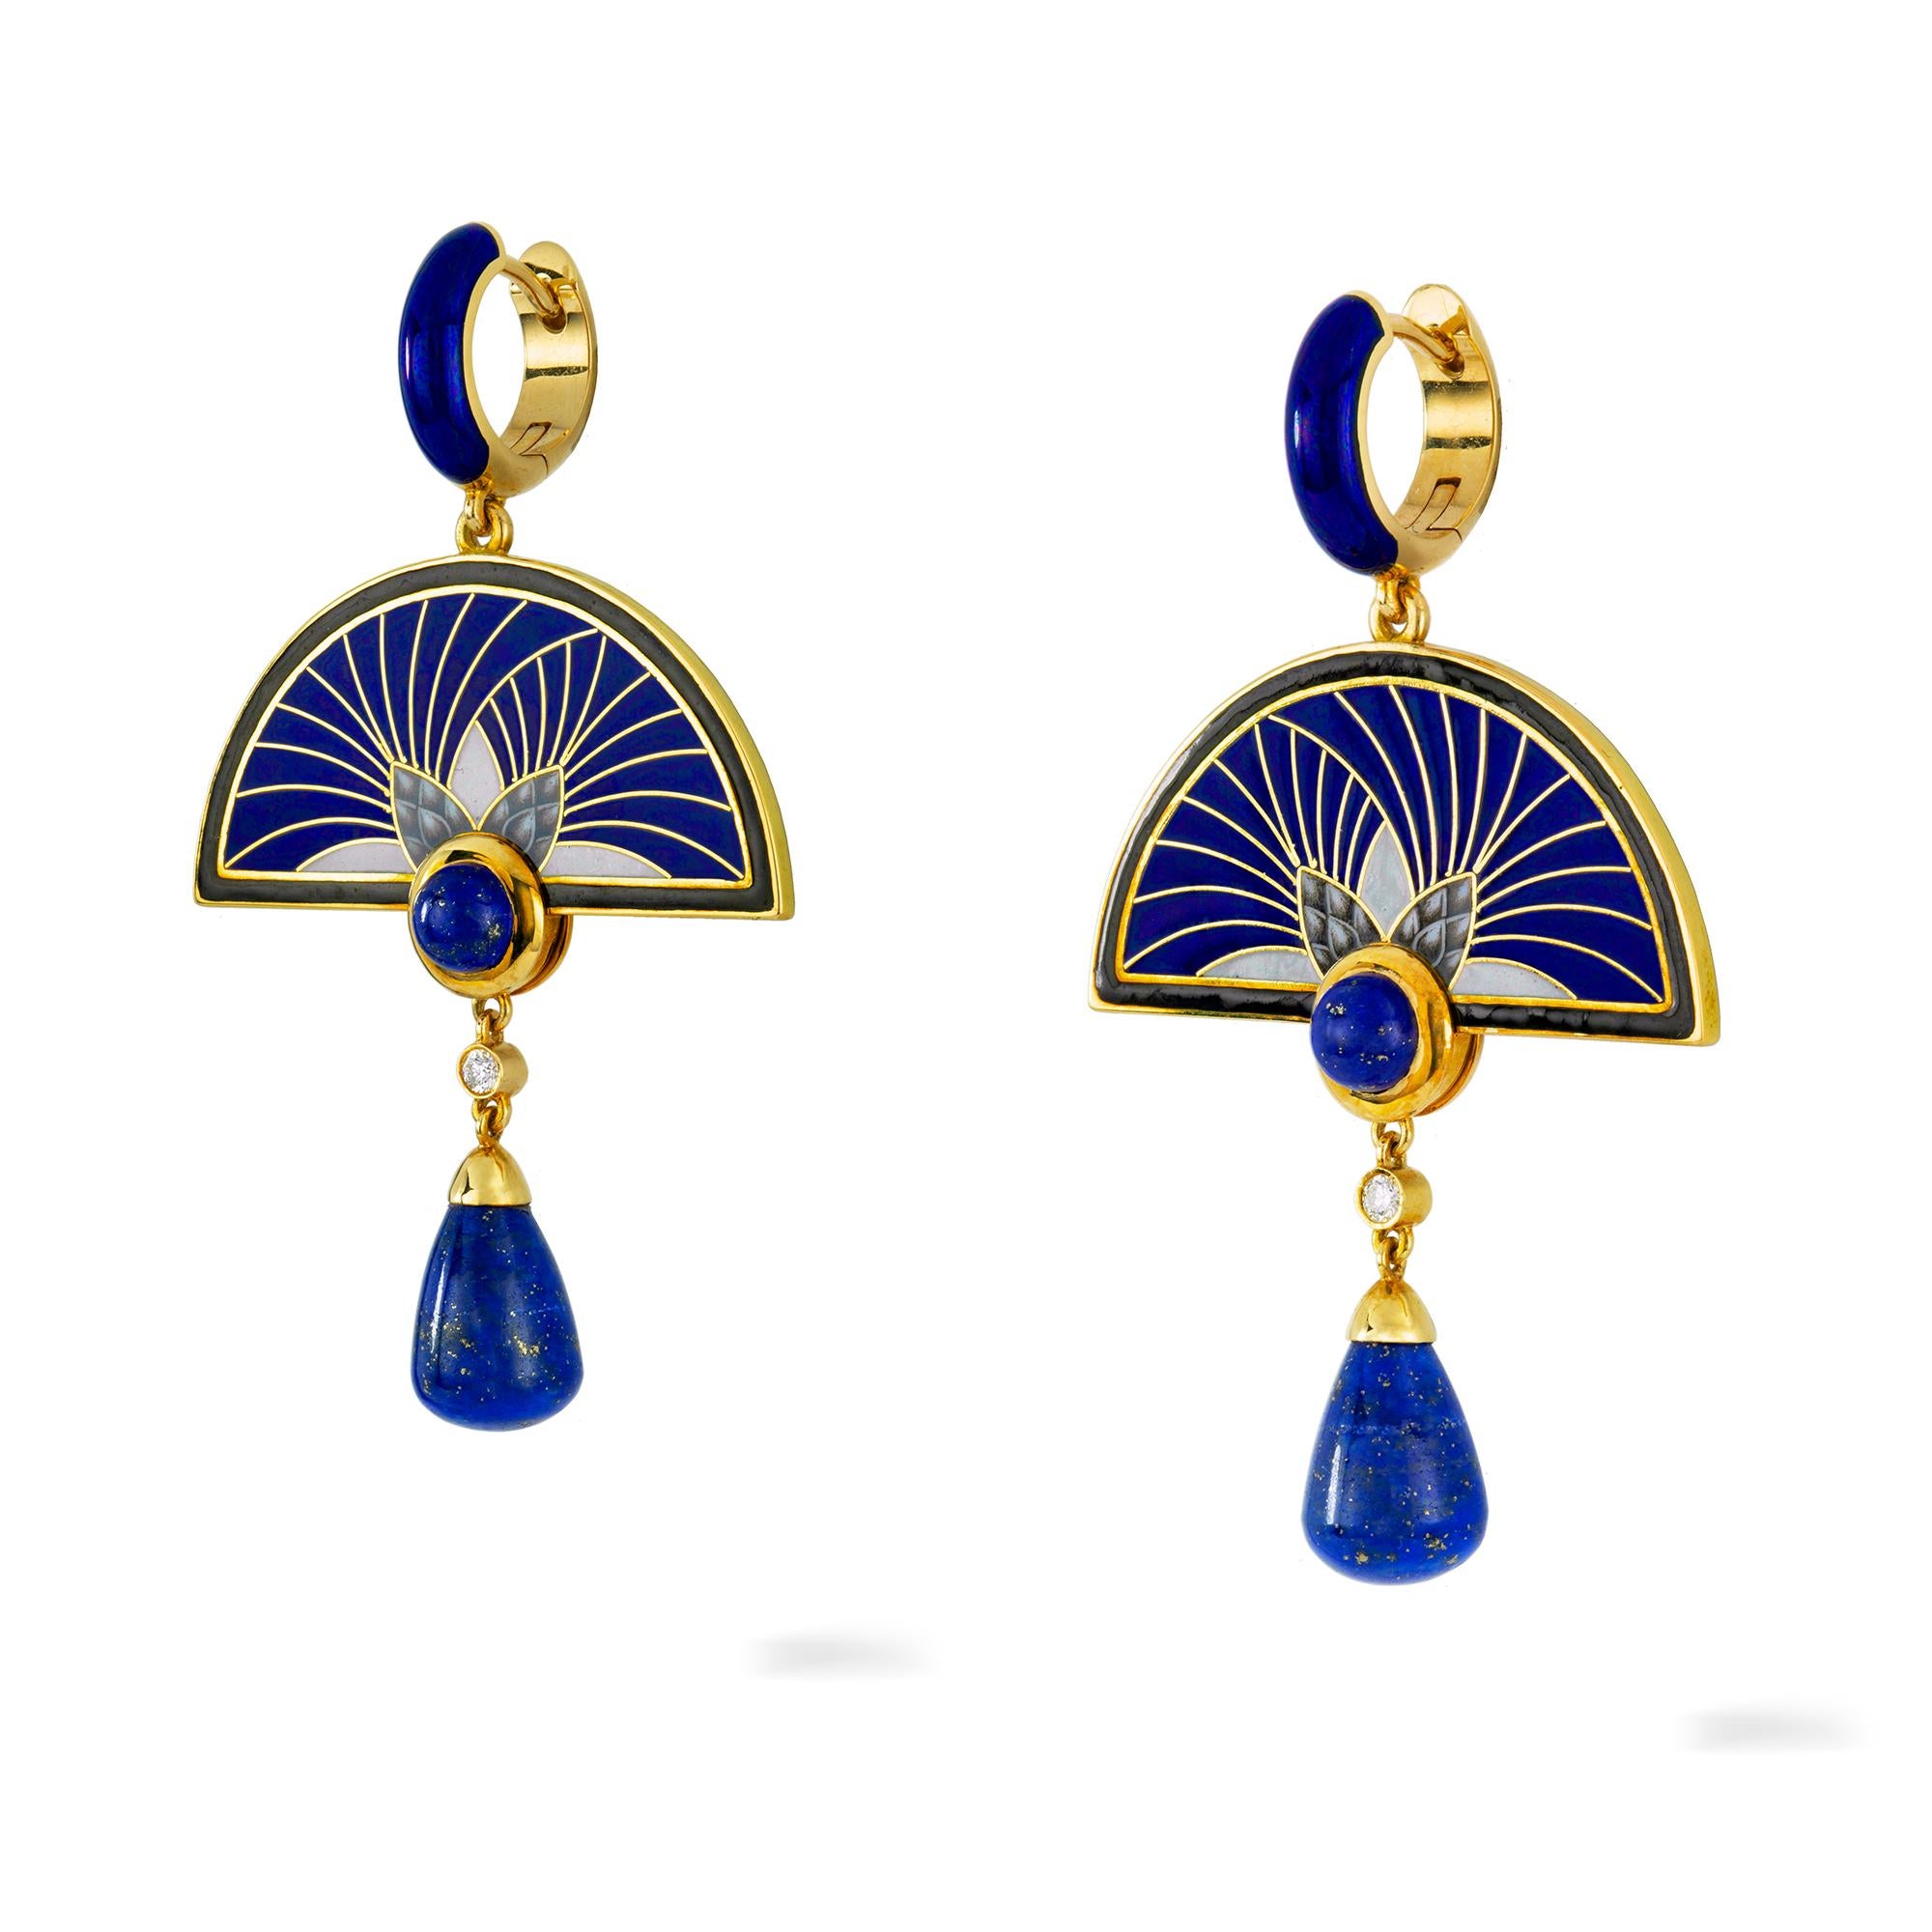 A pair of burdock earrings by Ilgiz F, each with a semi-circular enamelled panel depicting two burdocks, set with a round cabochon lapis and terminating to a diamond an lapis drop, suspended by a blue enamelled loop, all mounted in 18ct gold, made